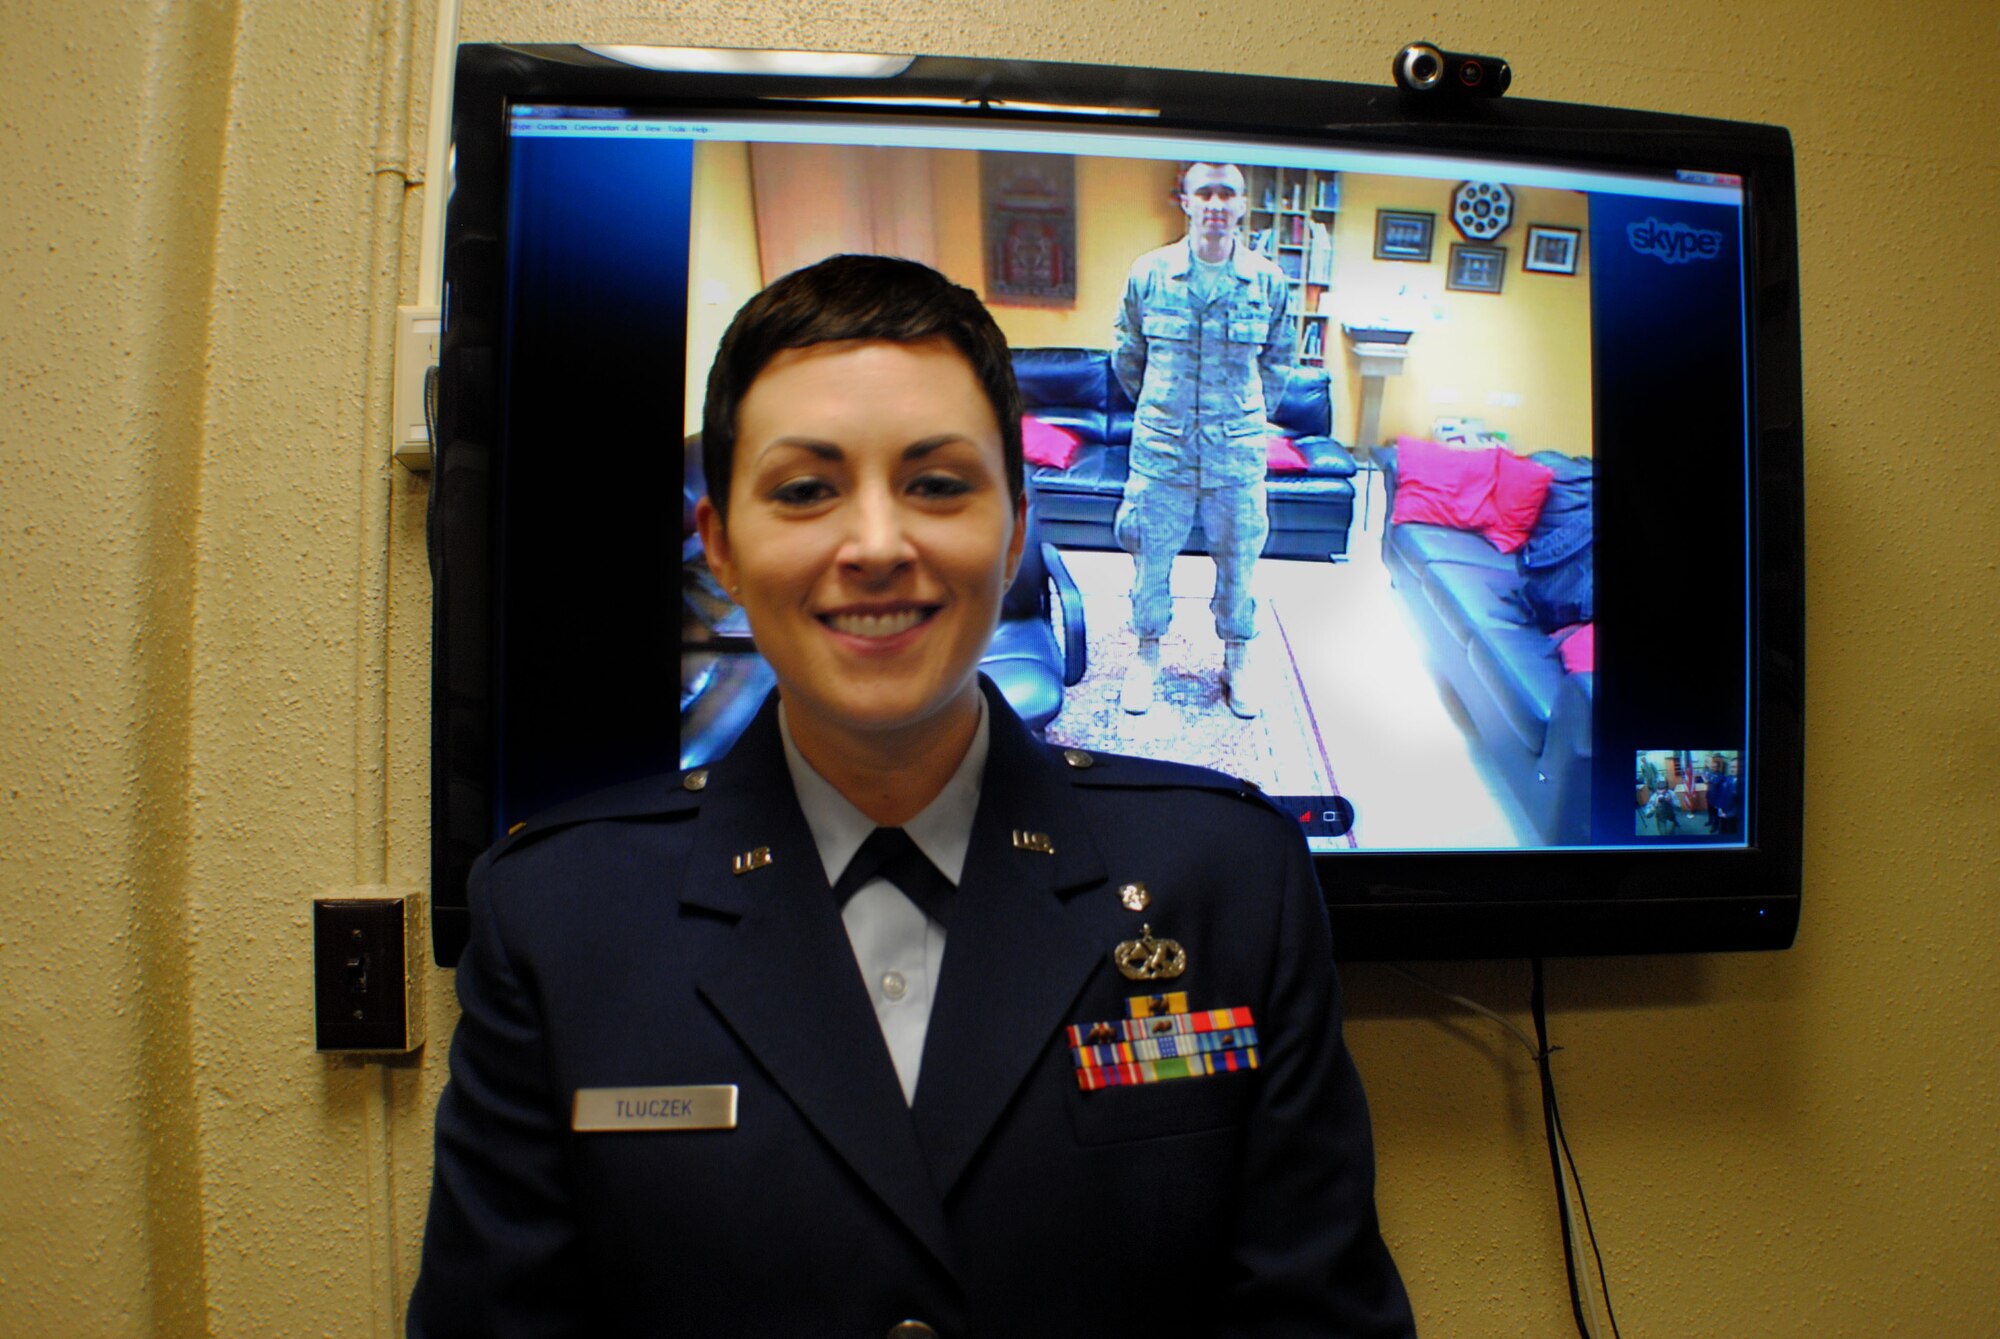 Moments after being commissioned as a second lieutenant in the United States Air Force Nurse Corps, former Staff Sgt. Donna Tluczek stands proudly with her husband, Tech. Sgt. Pawel Tluczek, who witnessed his wife’s commissioning ceremony via a live Internet broadcast, Feb.2, 2012, at the Air Force ROTC Detachment 610 headquarters inside the University of North Dakota Armory. The Tlucezks are a military couple from Grand Forks Air Force Base, N.D. (U.S. Air Force photo/Senior Airman Luis Loza Gutierrez) 